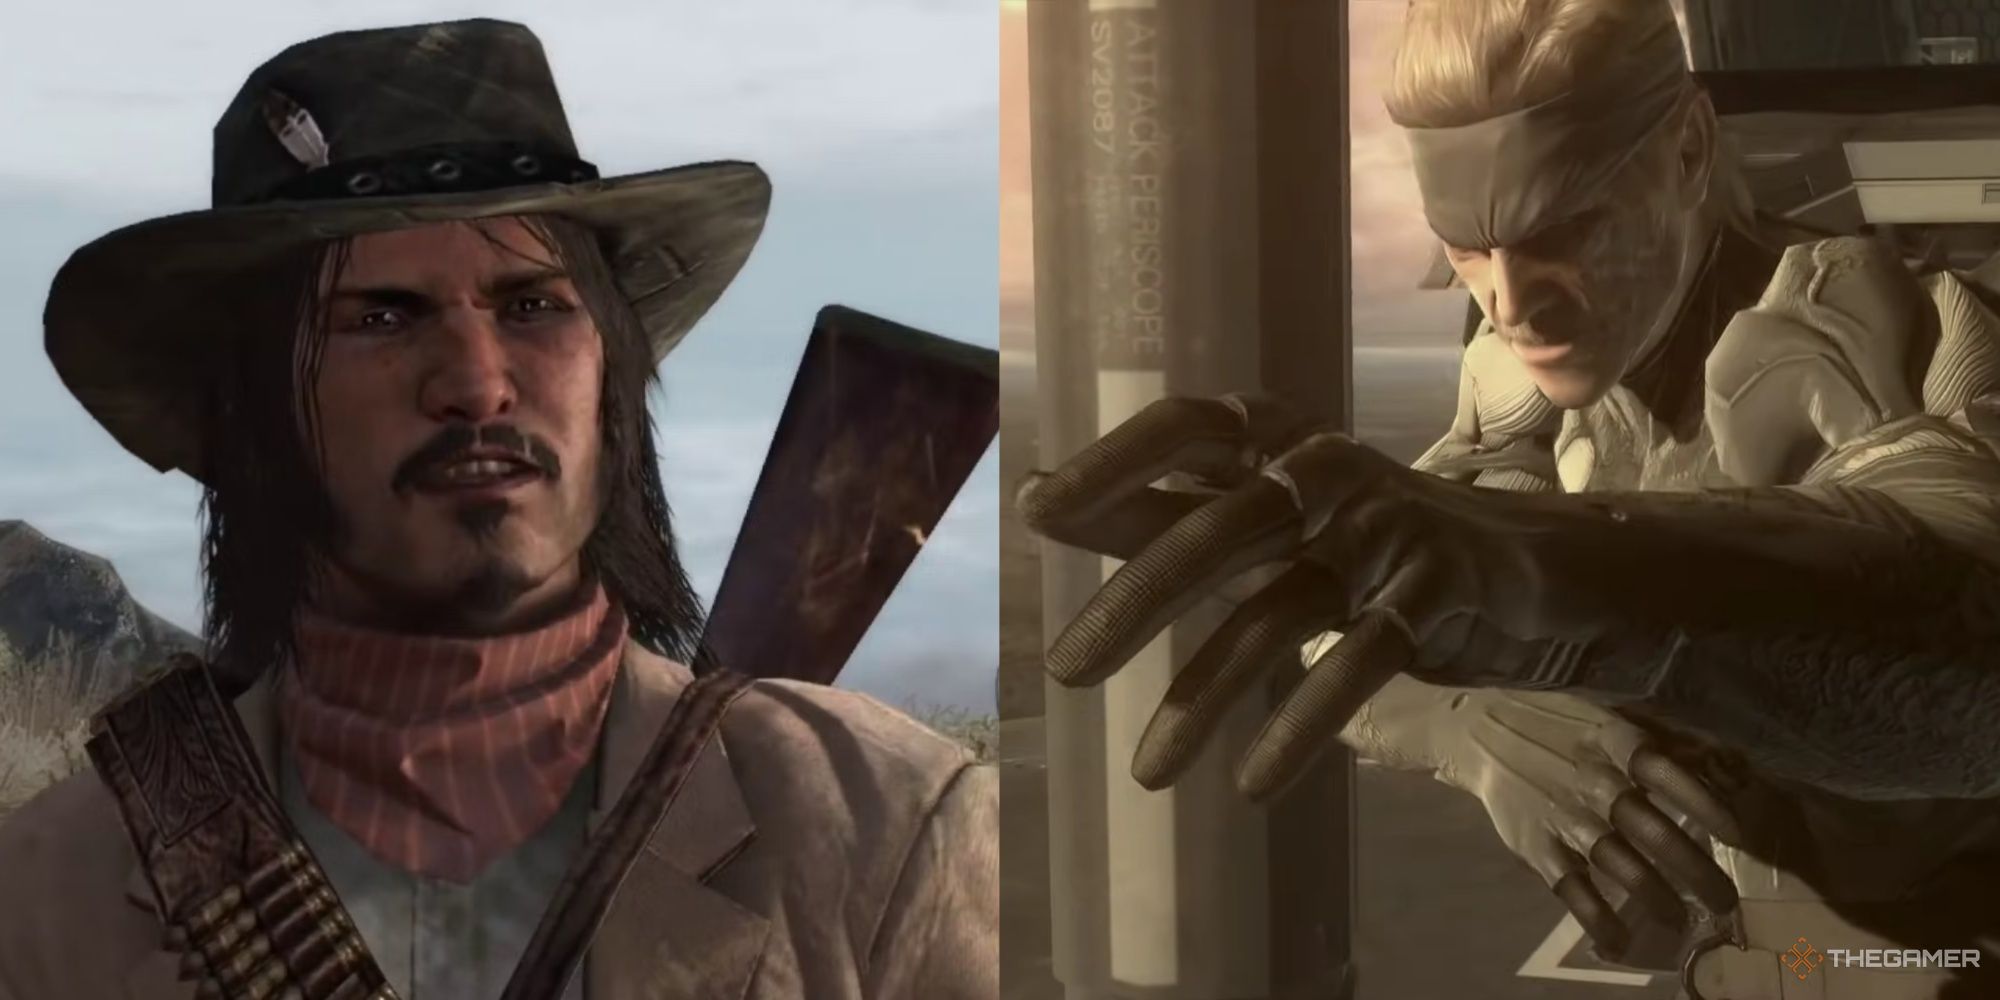 Jack Marston from Red Dead Redemption and Old Snake from Metal Gear Solid 4